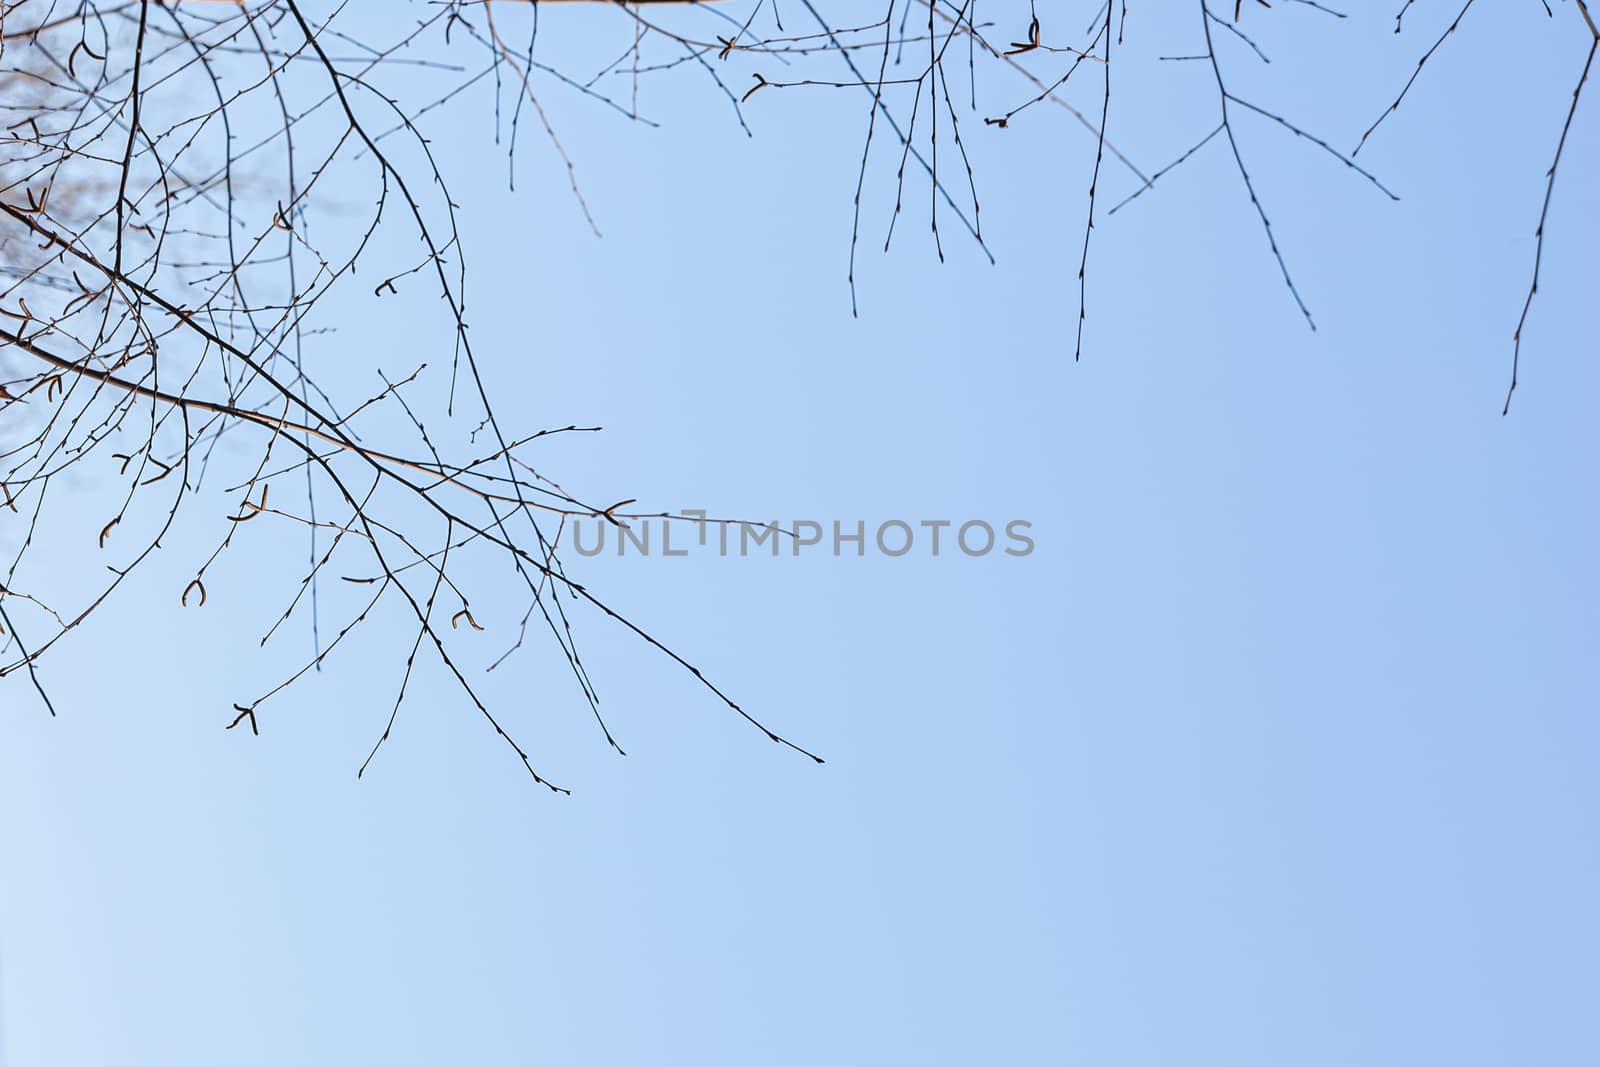 leafless tree branches against the blue sky by bonilook